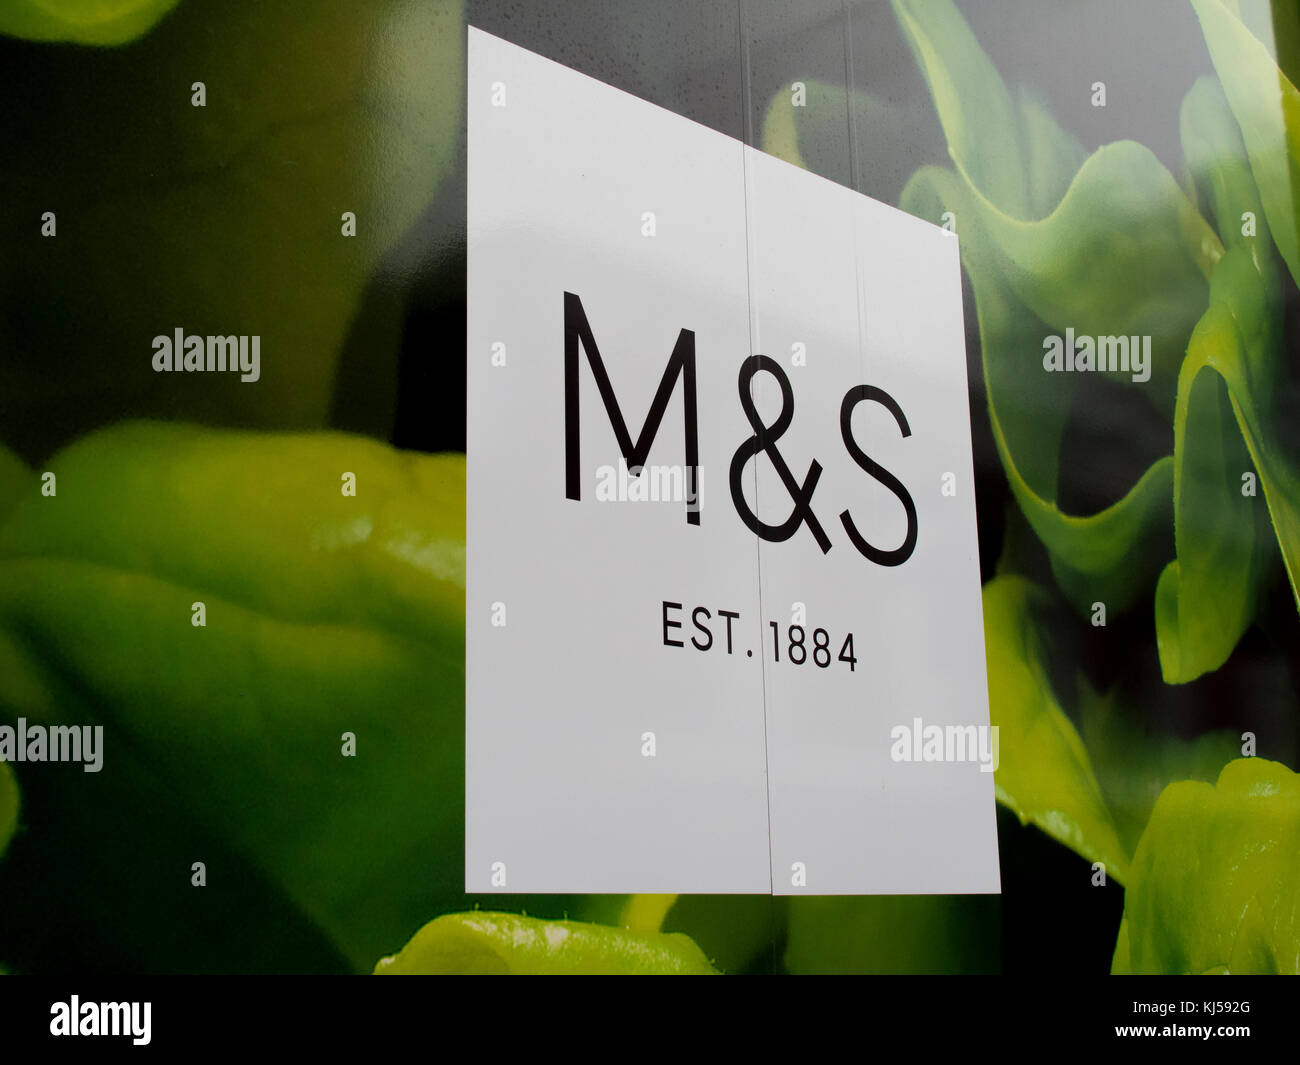 Marks and Spenser window display, company founded in 1884 by Michael Marks and Thomas Spenser Stock Photo